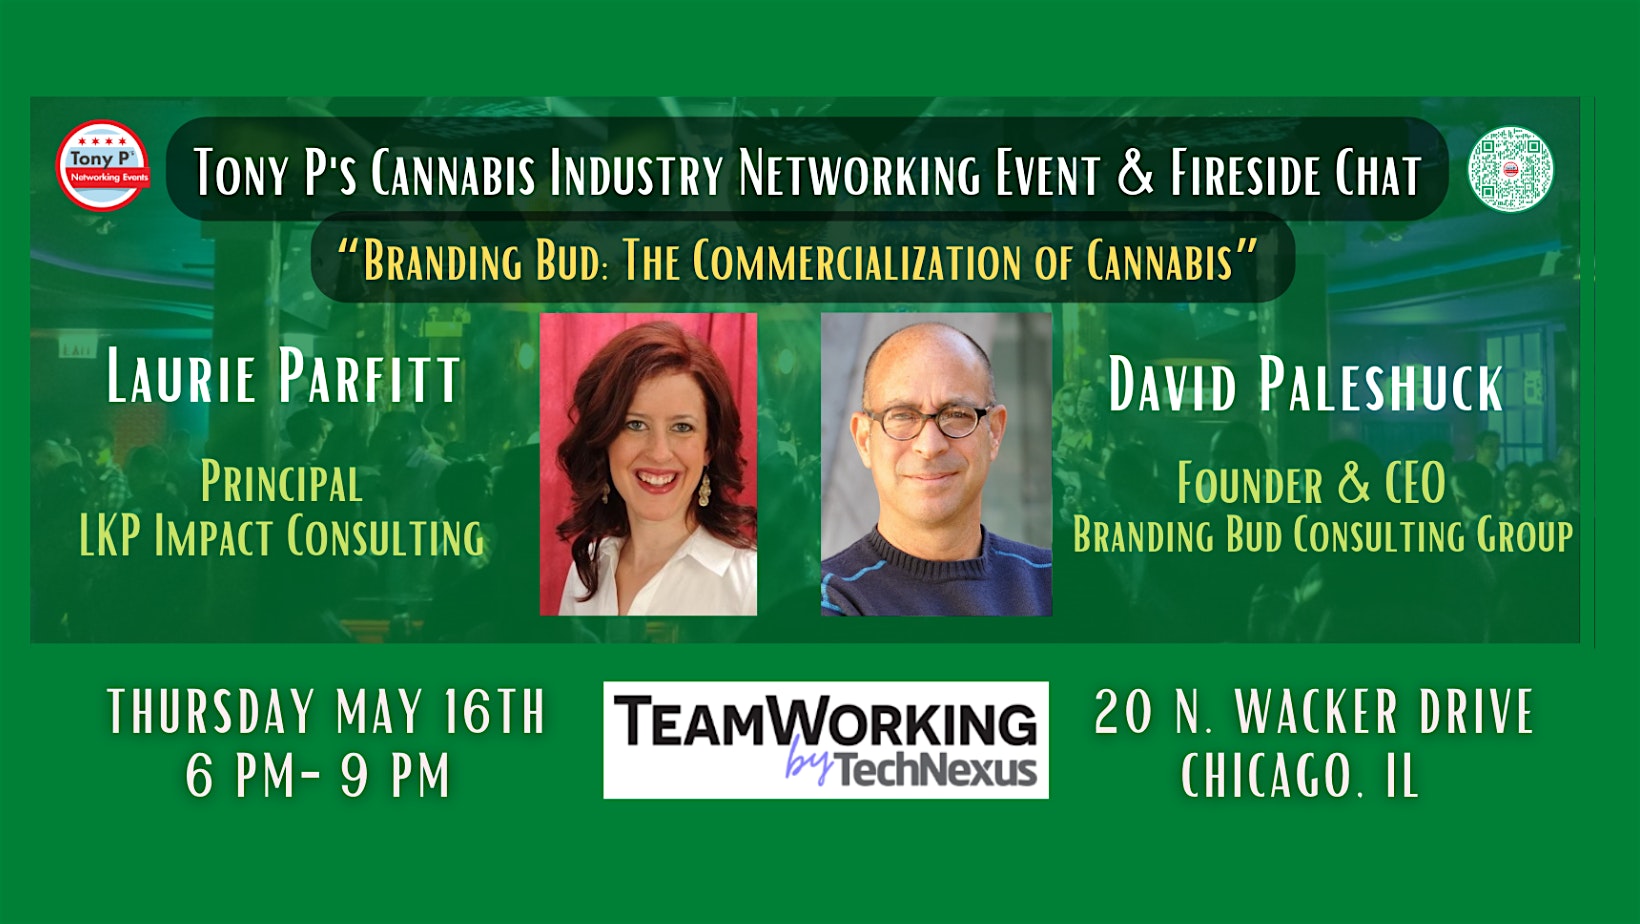 Tony P’s Cannabis Industry Networking Event & Fireside Chat: Thurs May 16th